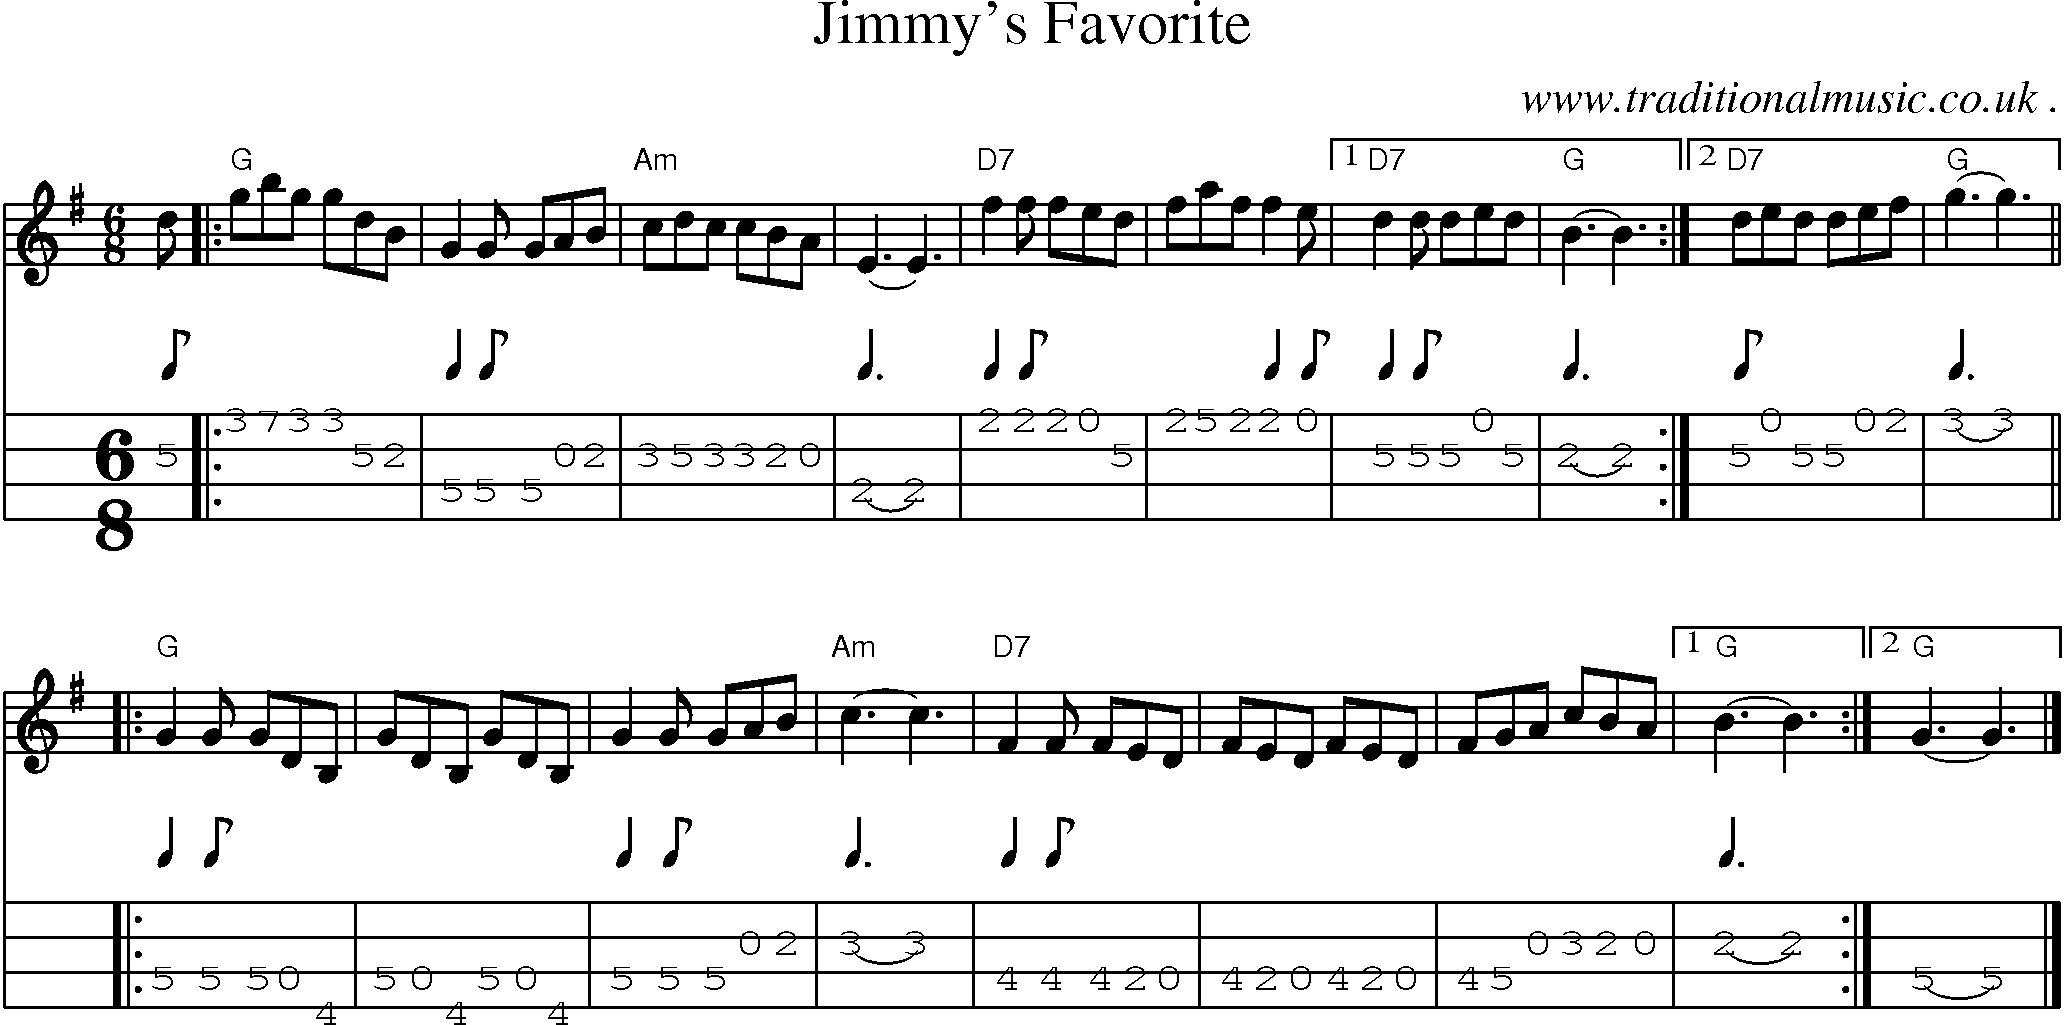 Sheet-music  score, Chords and Mandolin Tabs for Jimmys Favorite